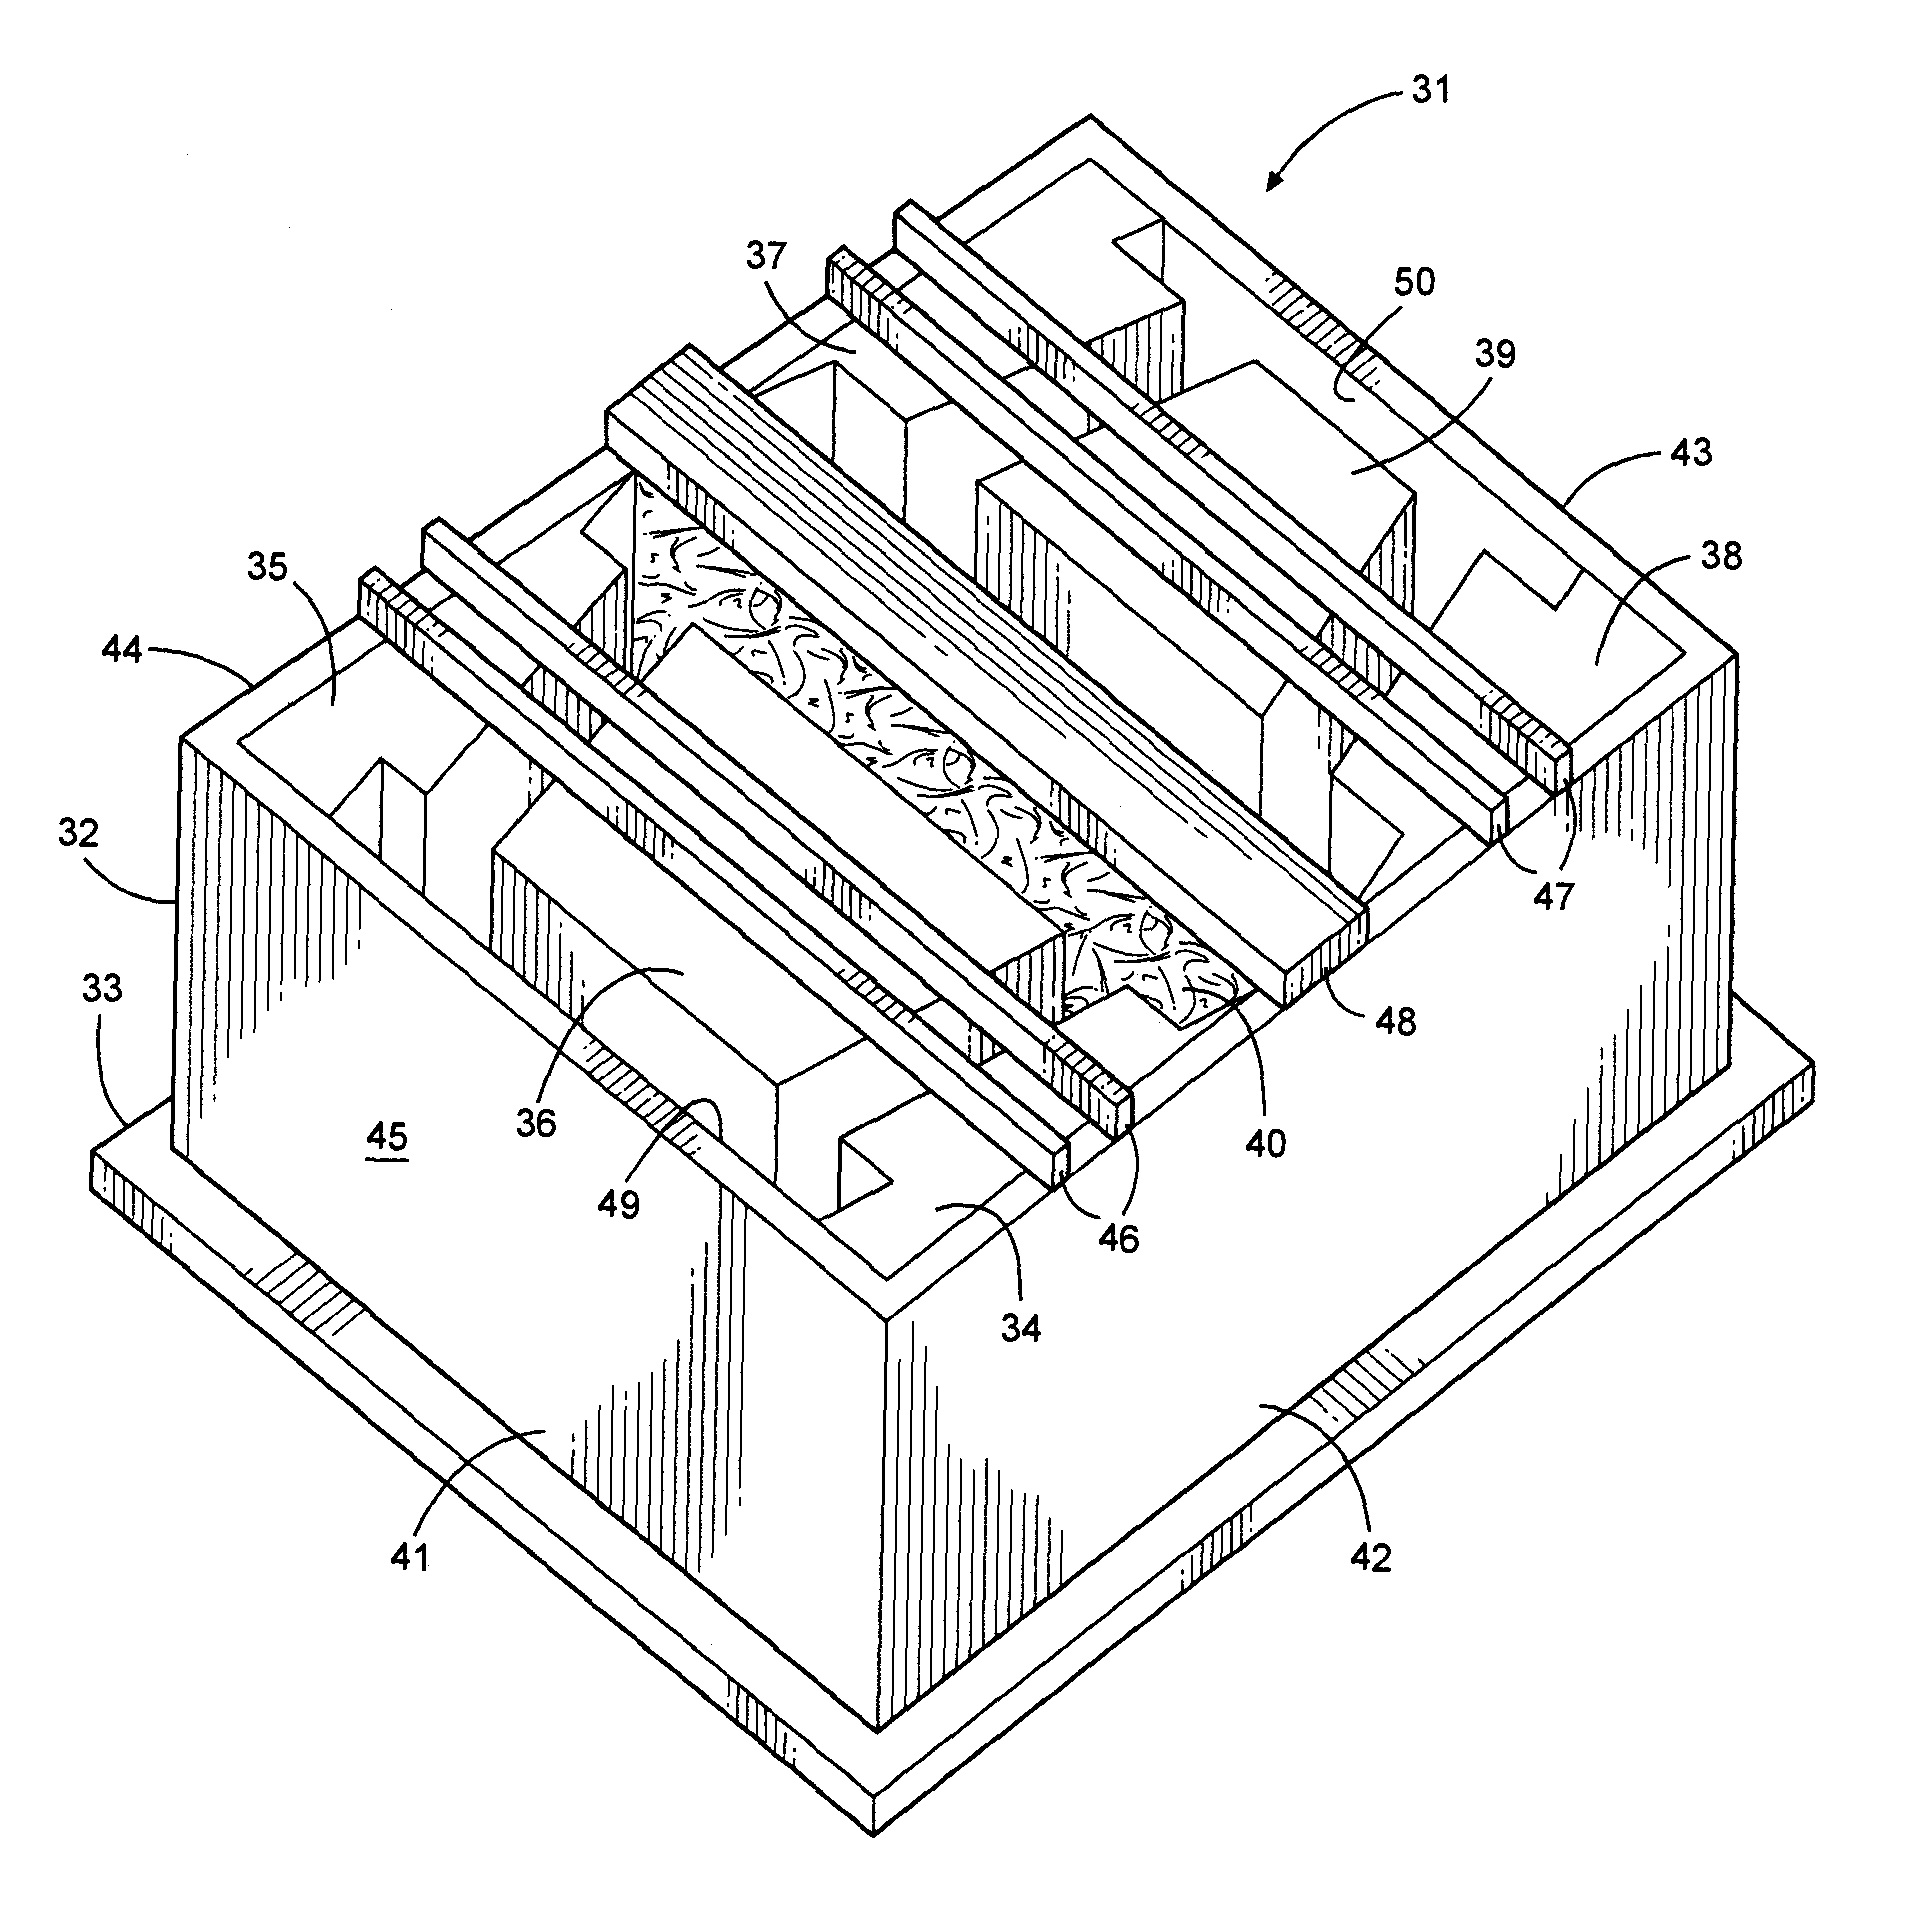 Method And Apparatus For Dry Casting Concrete Blocks Having A Decorative Face